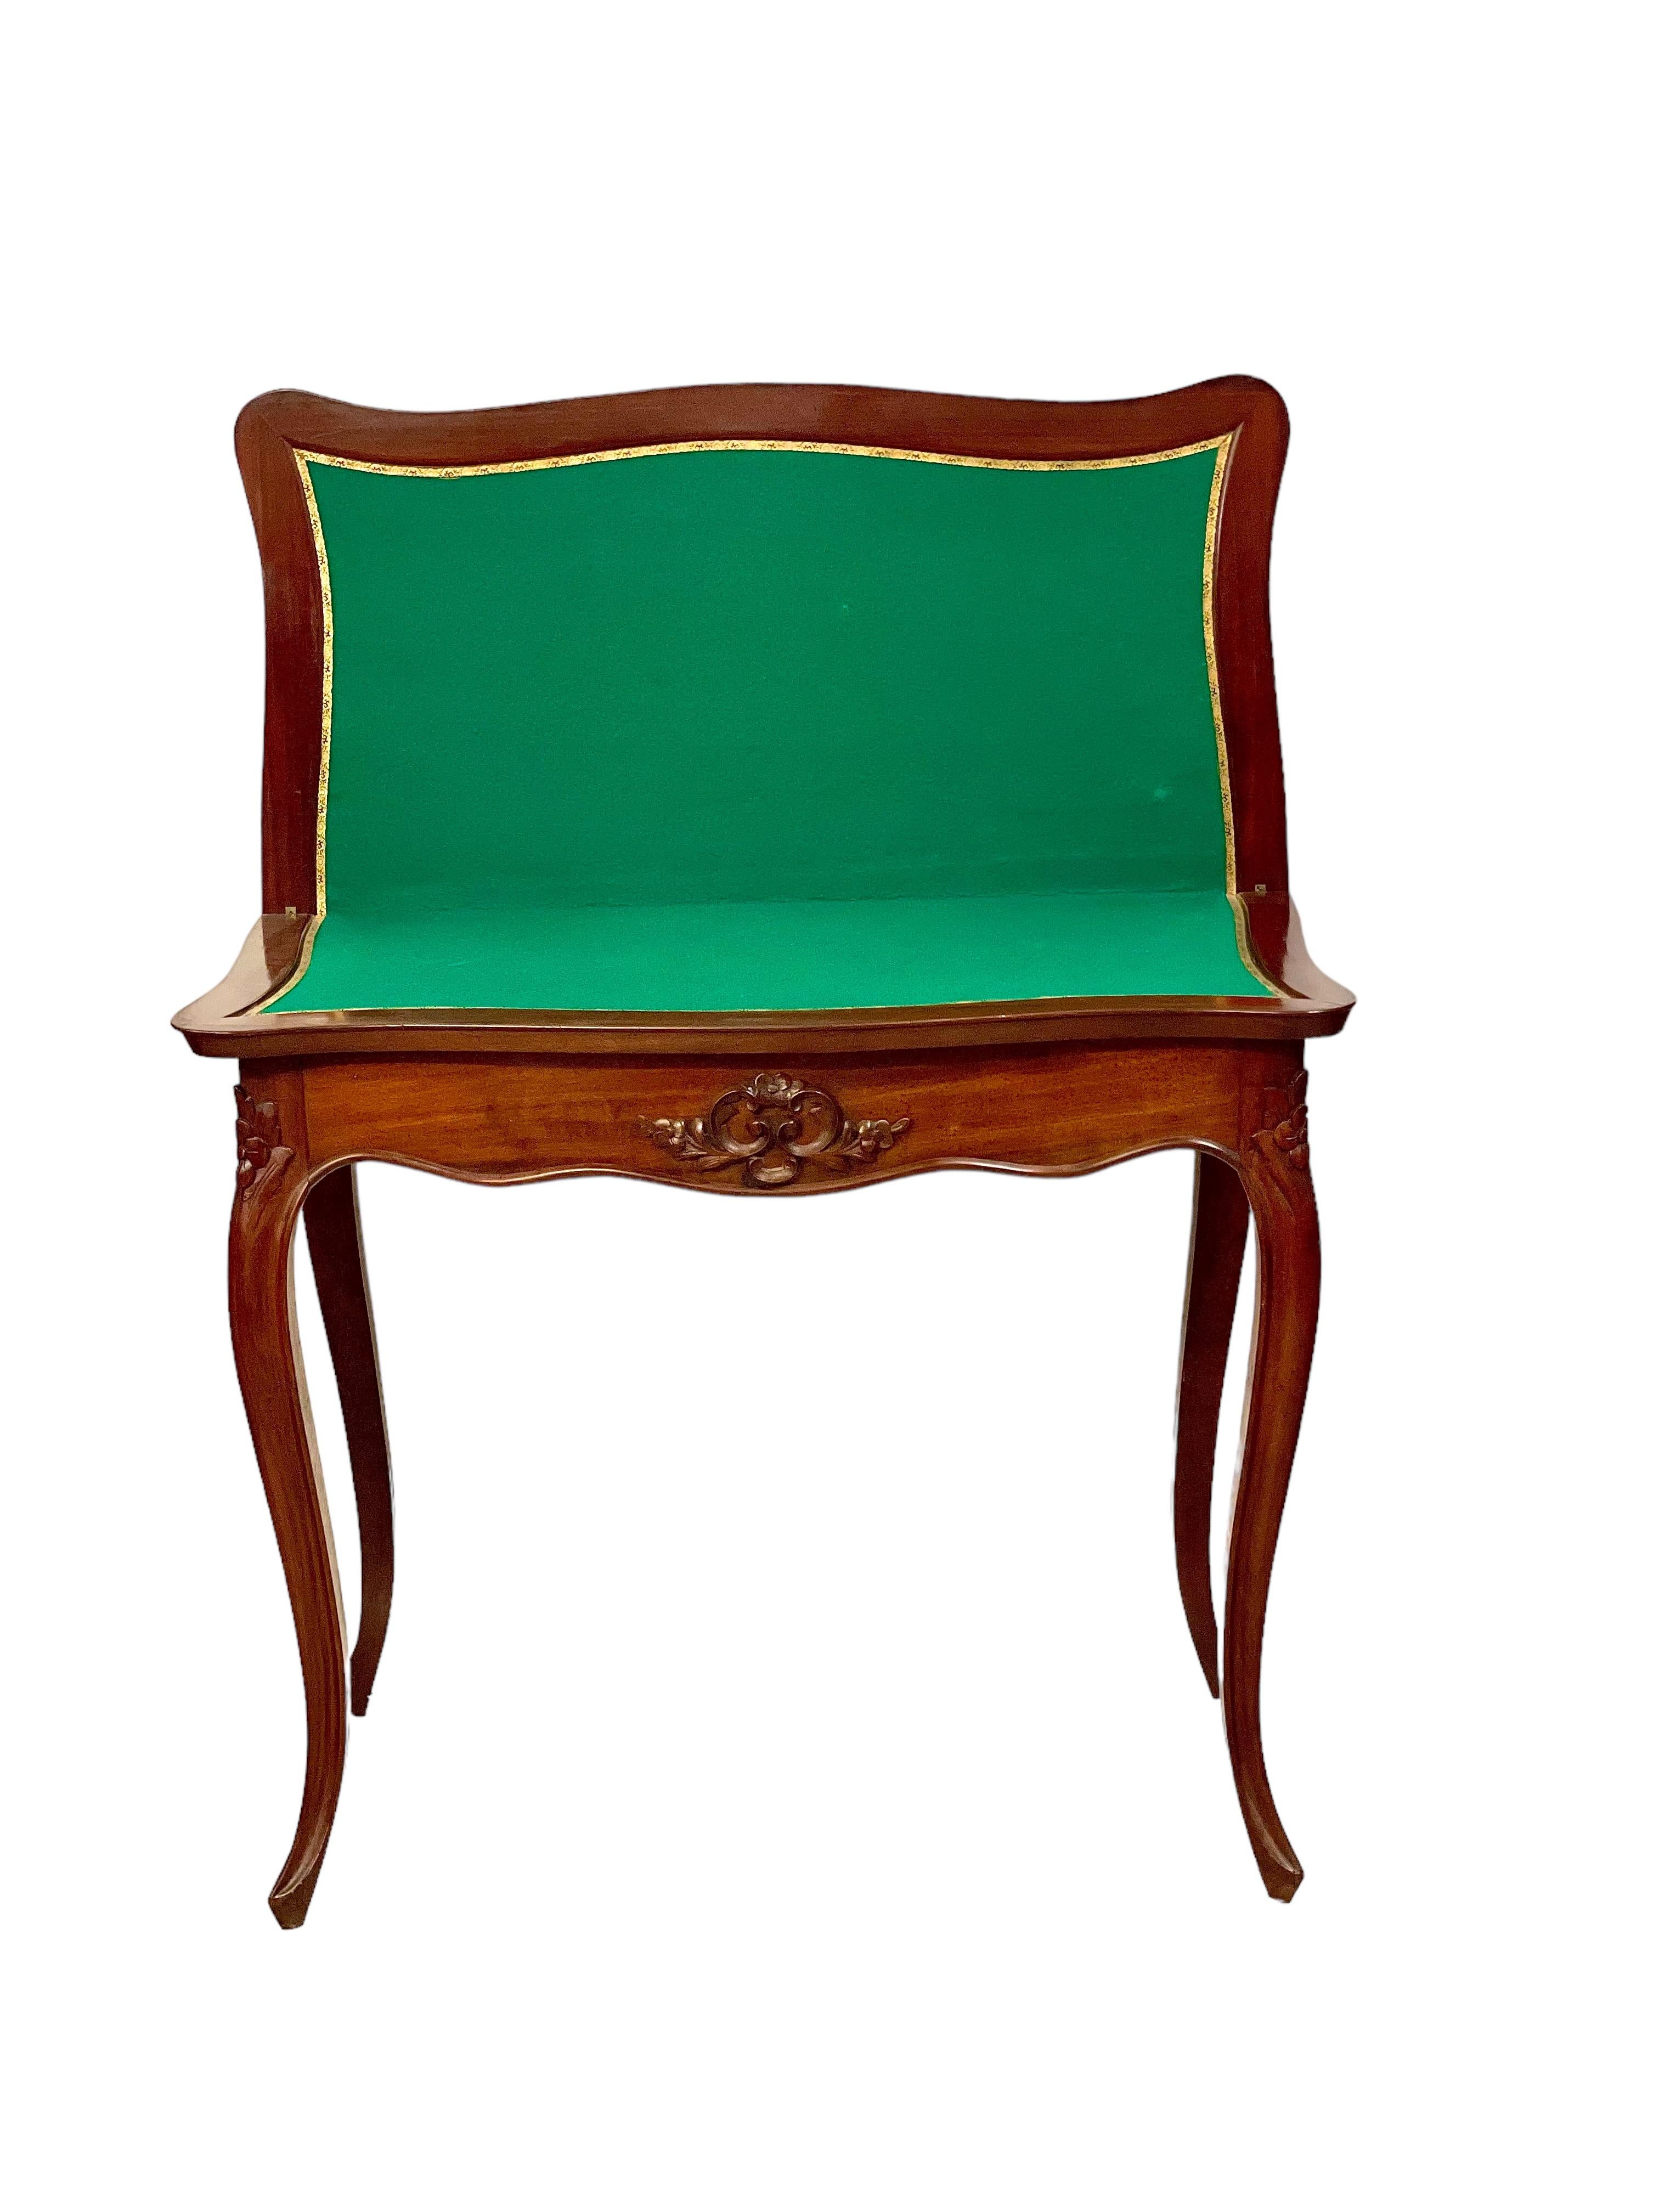 An elegant 19th century Napoleon III-era Fruitwood gaming table, featuring an intricate moulded flourish on its front apron and beautifully carved roses at each shoulder. The top of the table is hinged, and opens to reveal a shaped, green baize